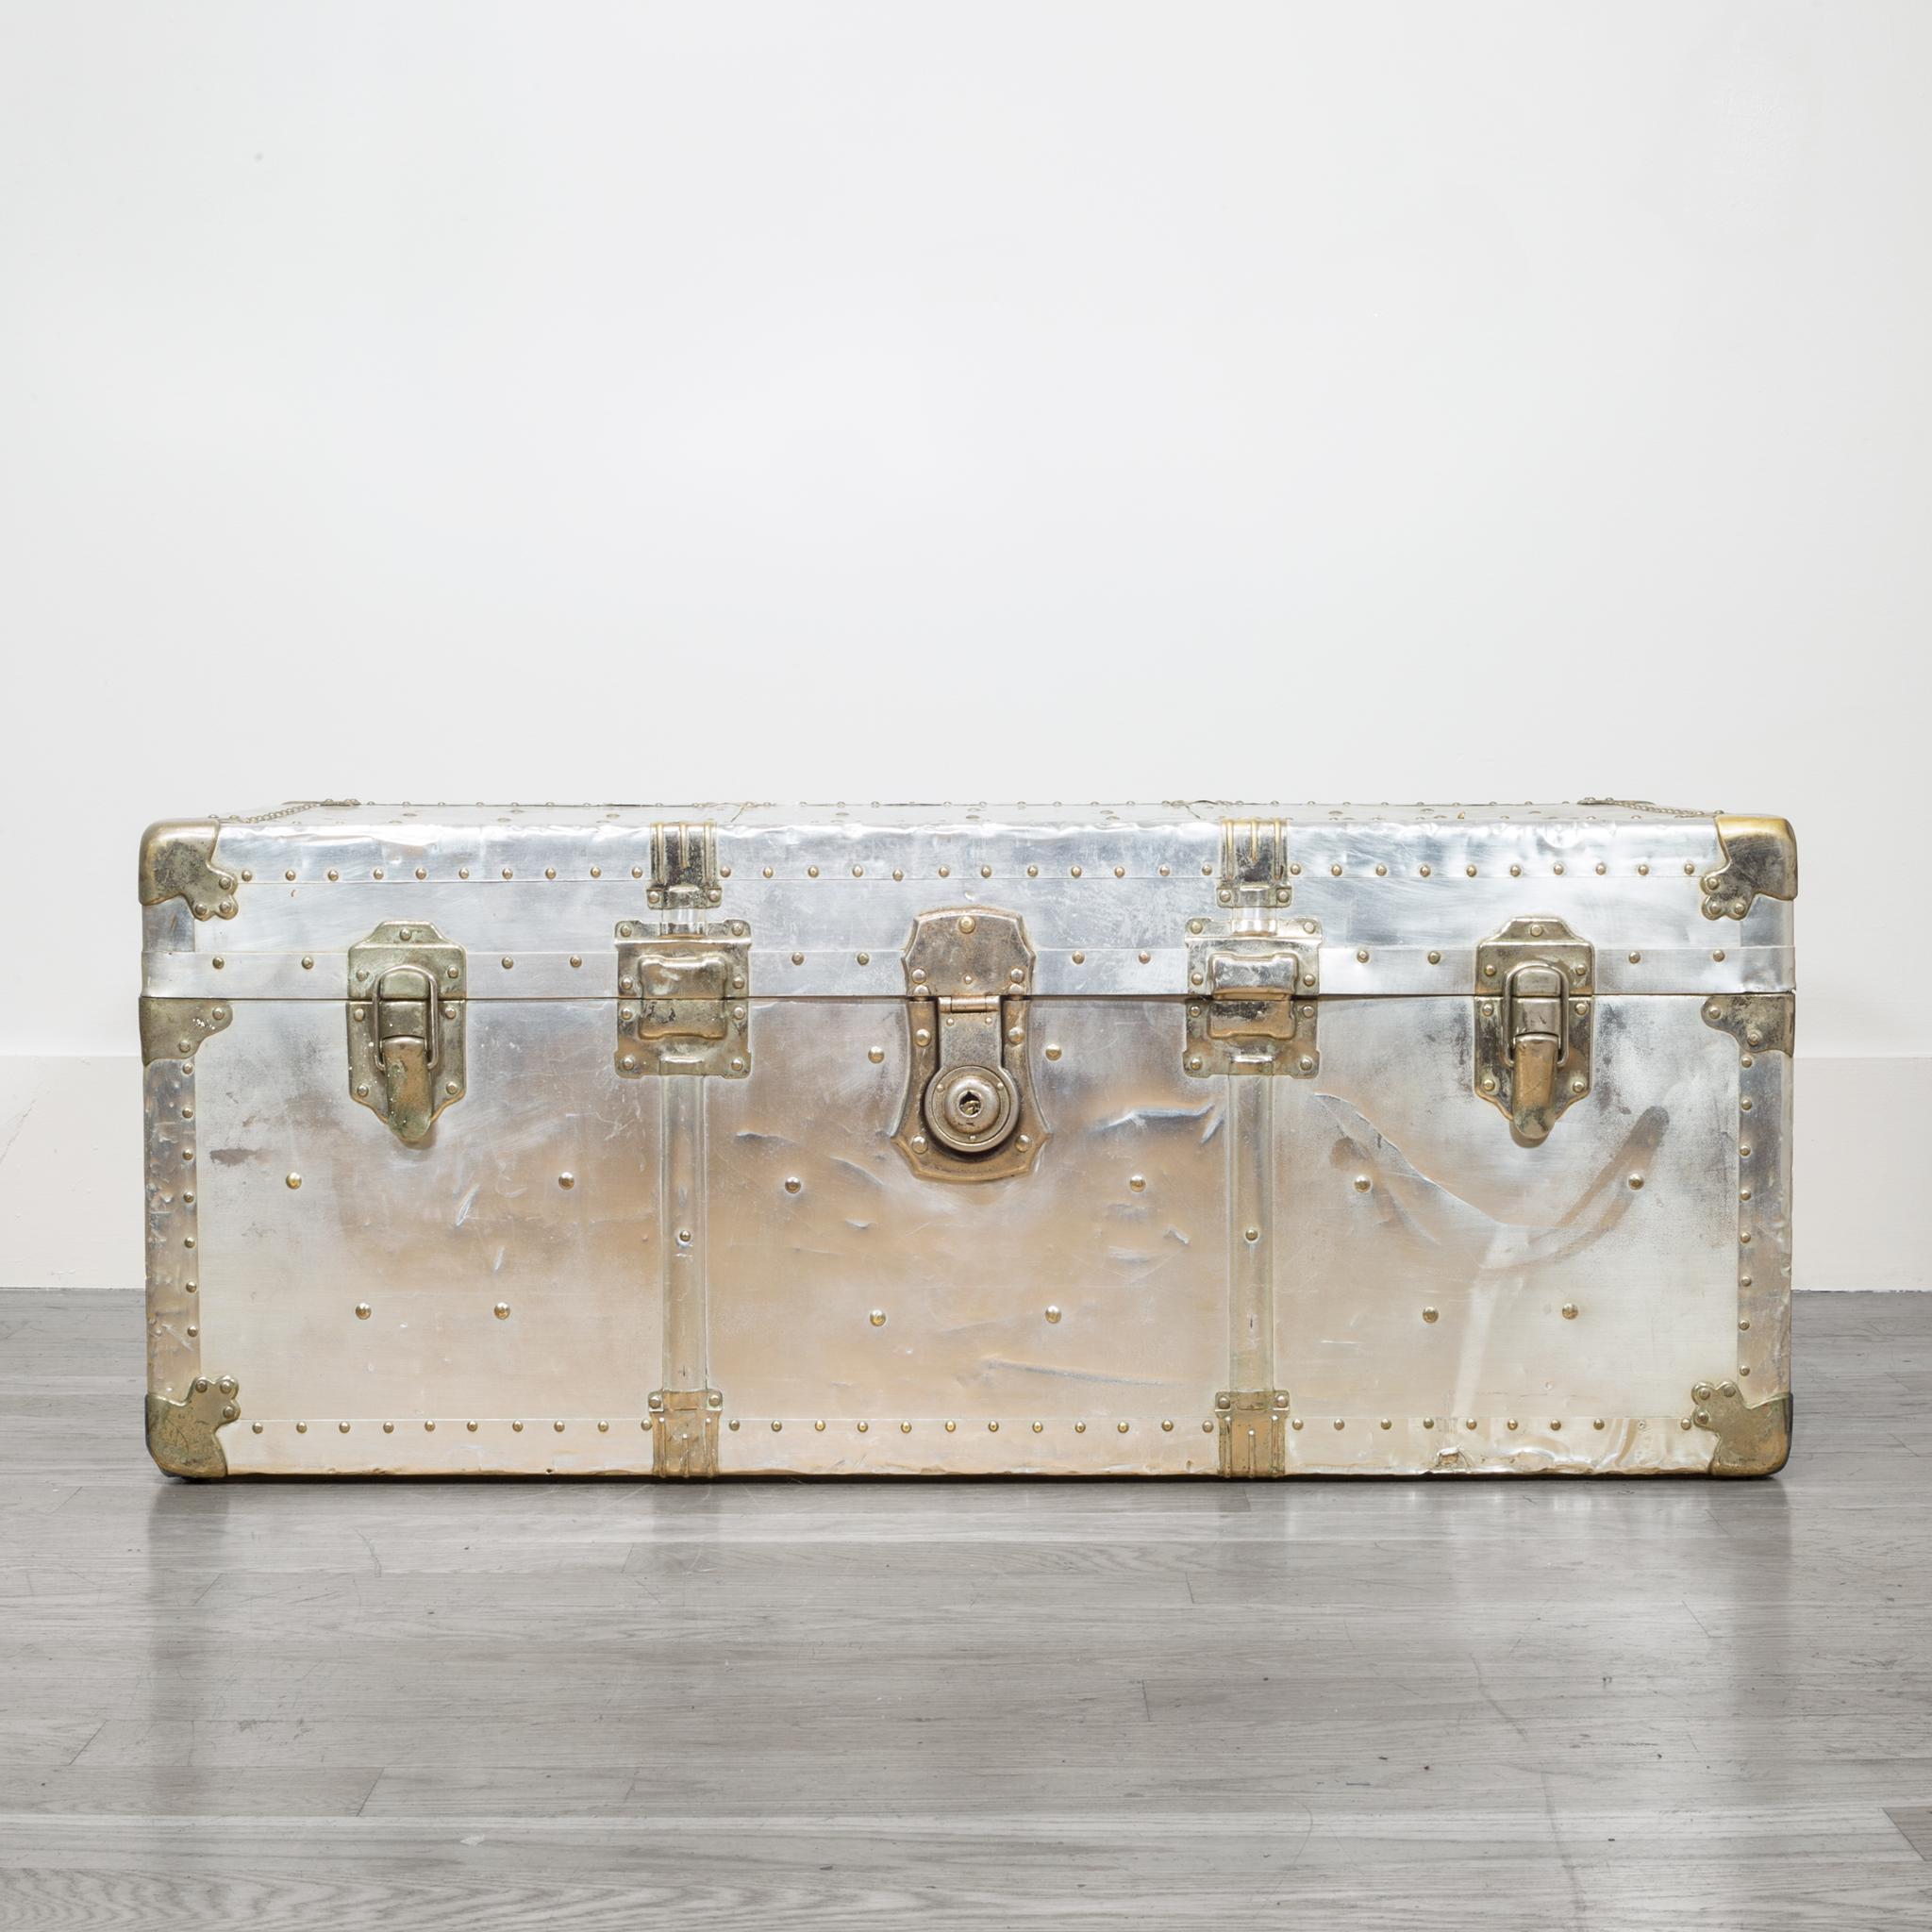 About

This is an original polished aluminum trunk with brass accents and leather handles. The interior is lined in fabric with a removable tray. The lock has 